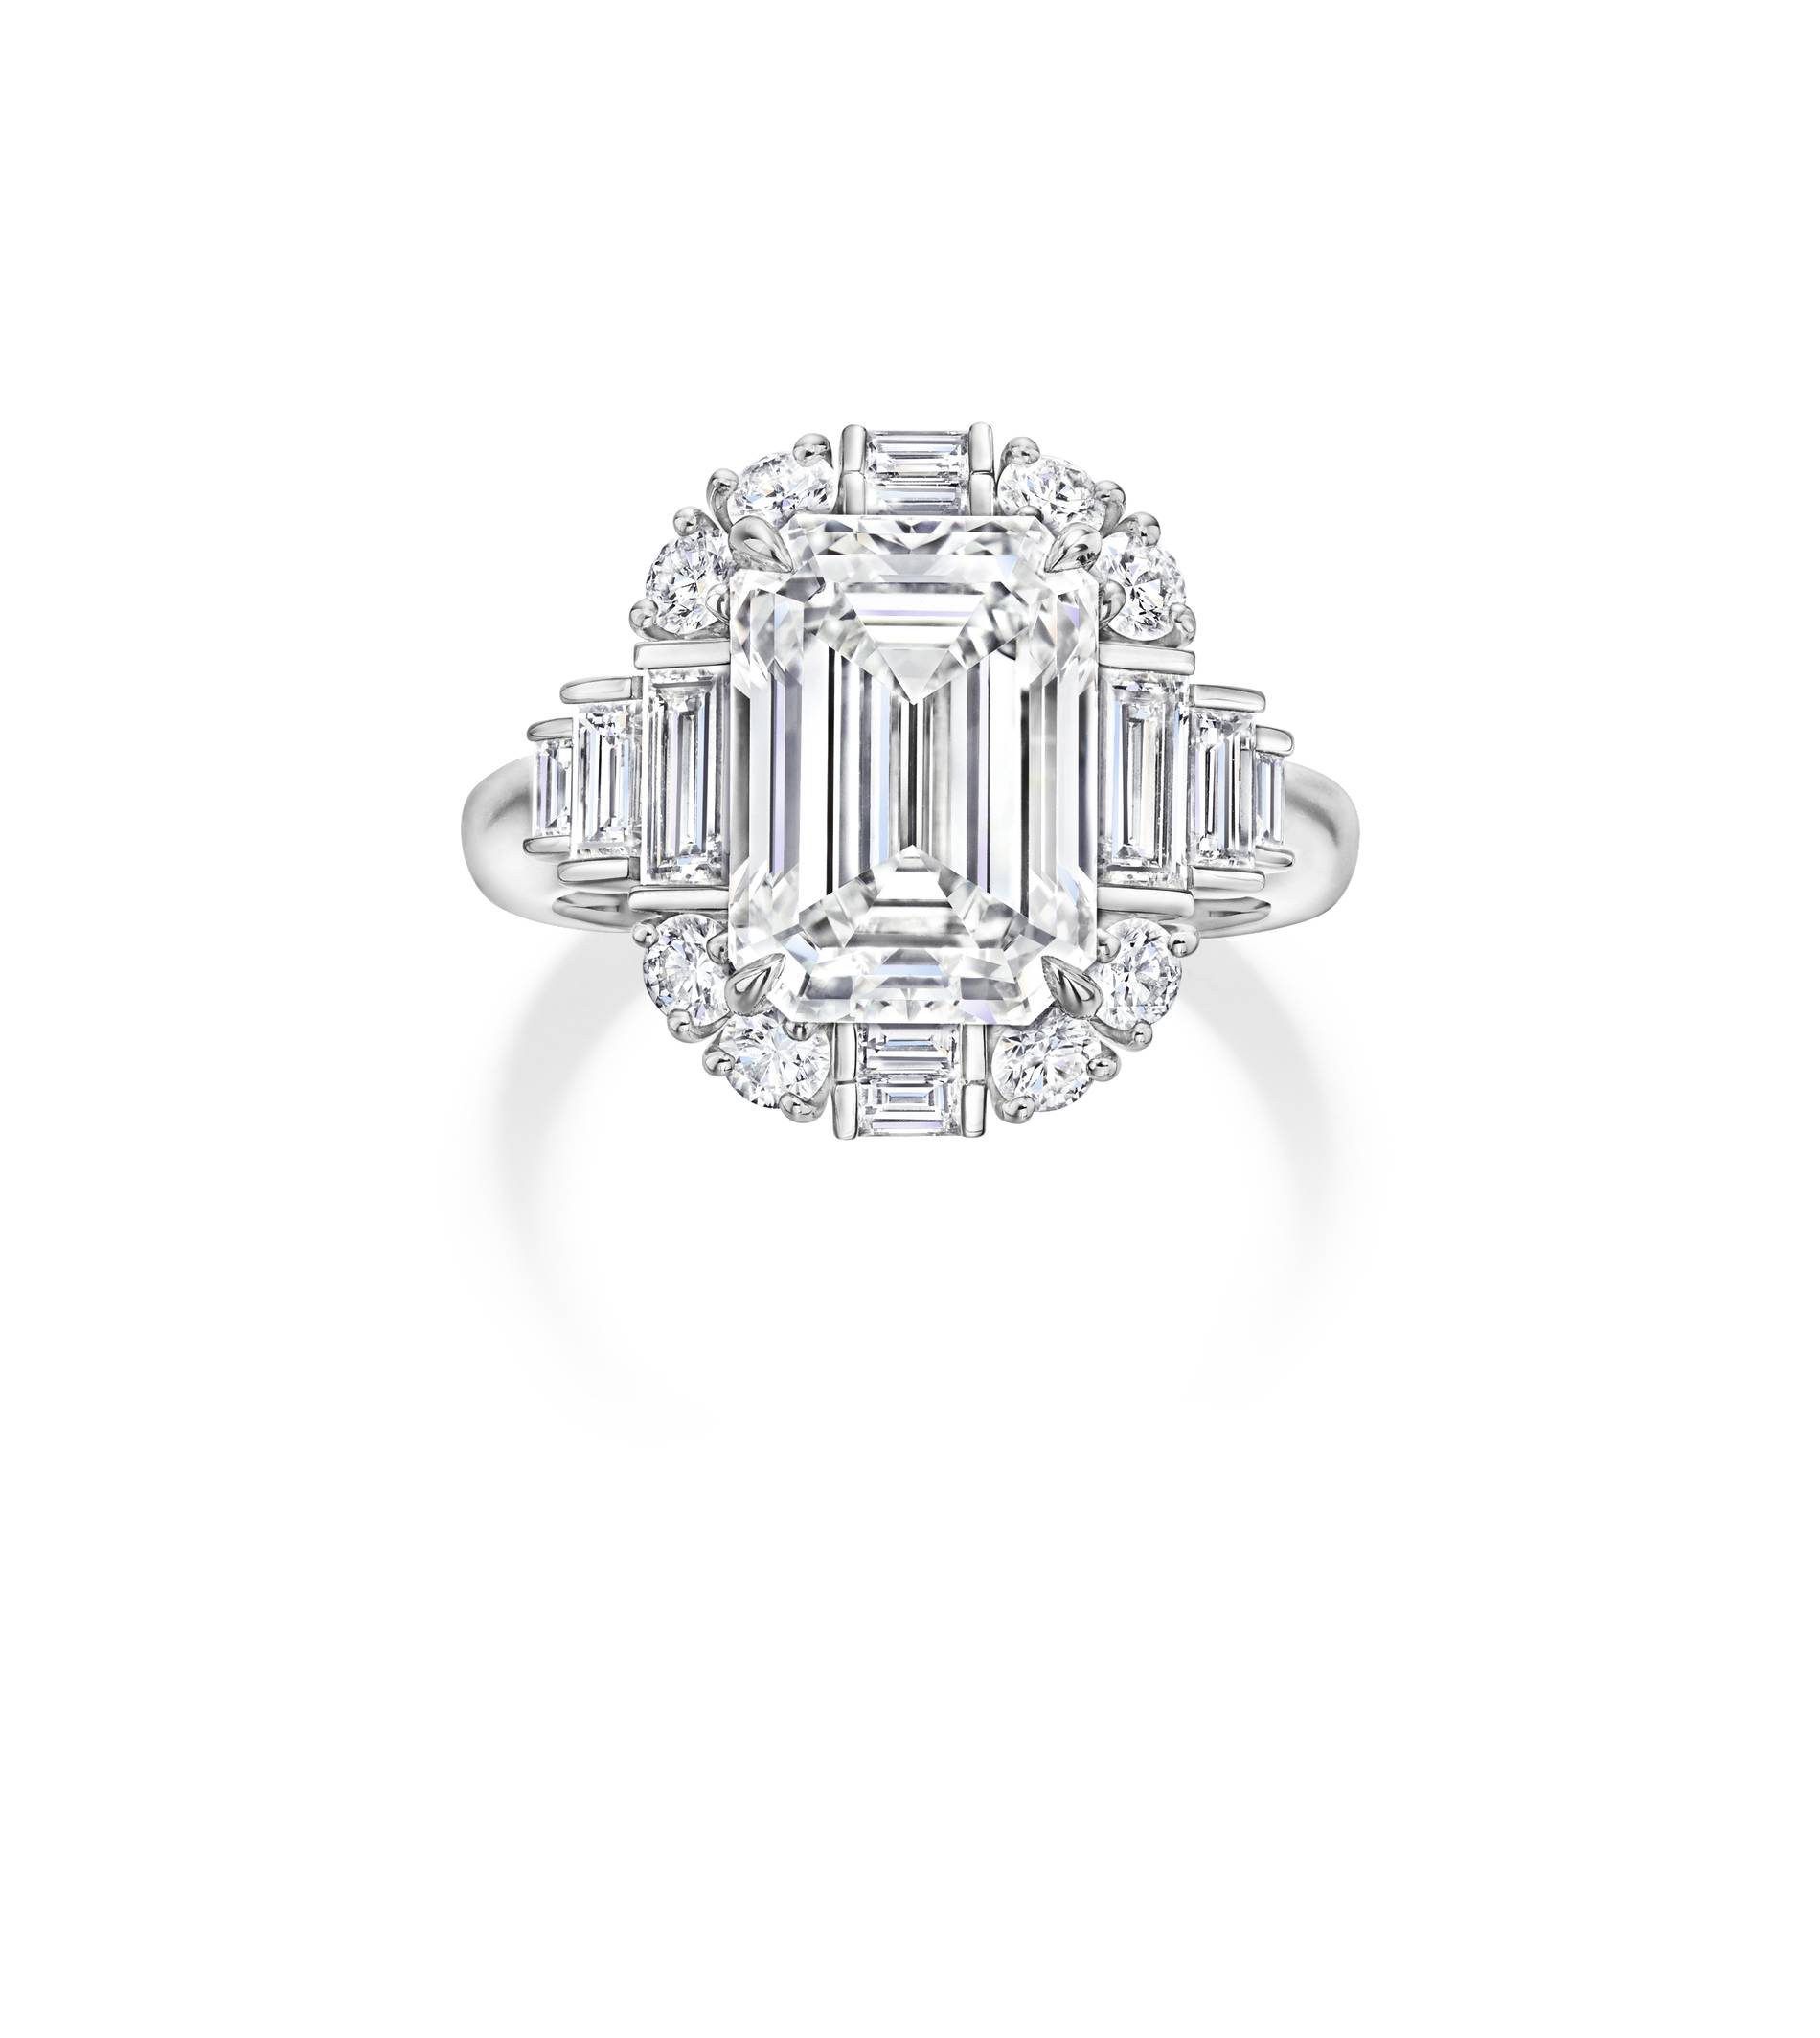 Harry Winston Bridal Couture ring collection